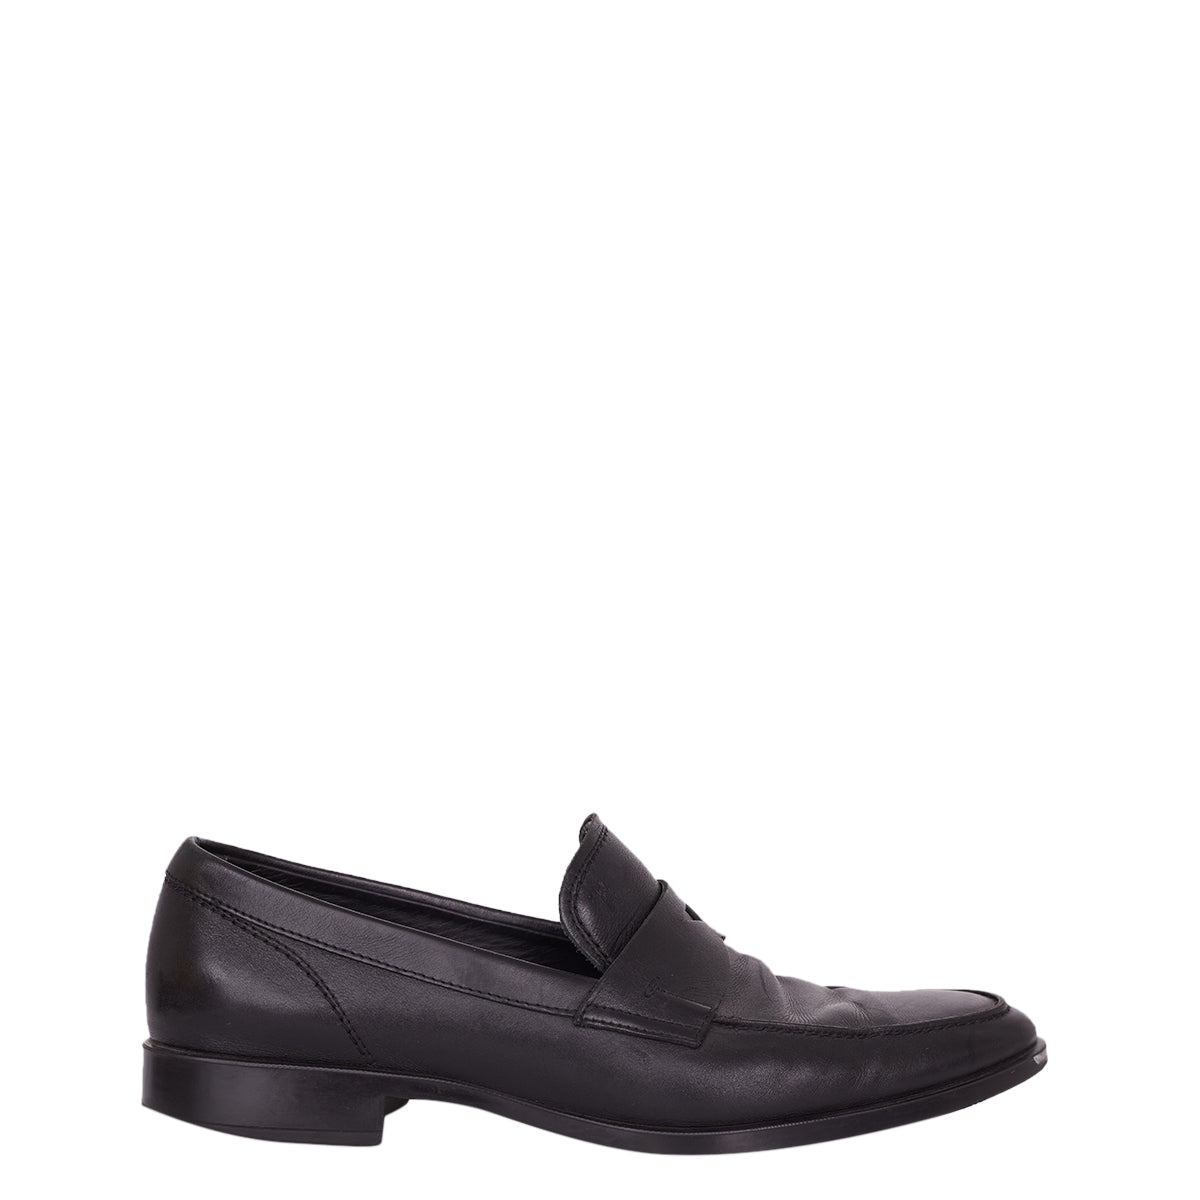 Sapato Social Tods Tam. 40 Br